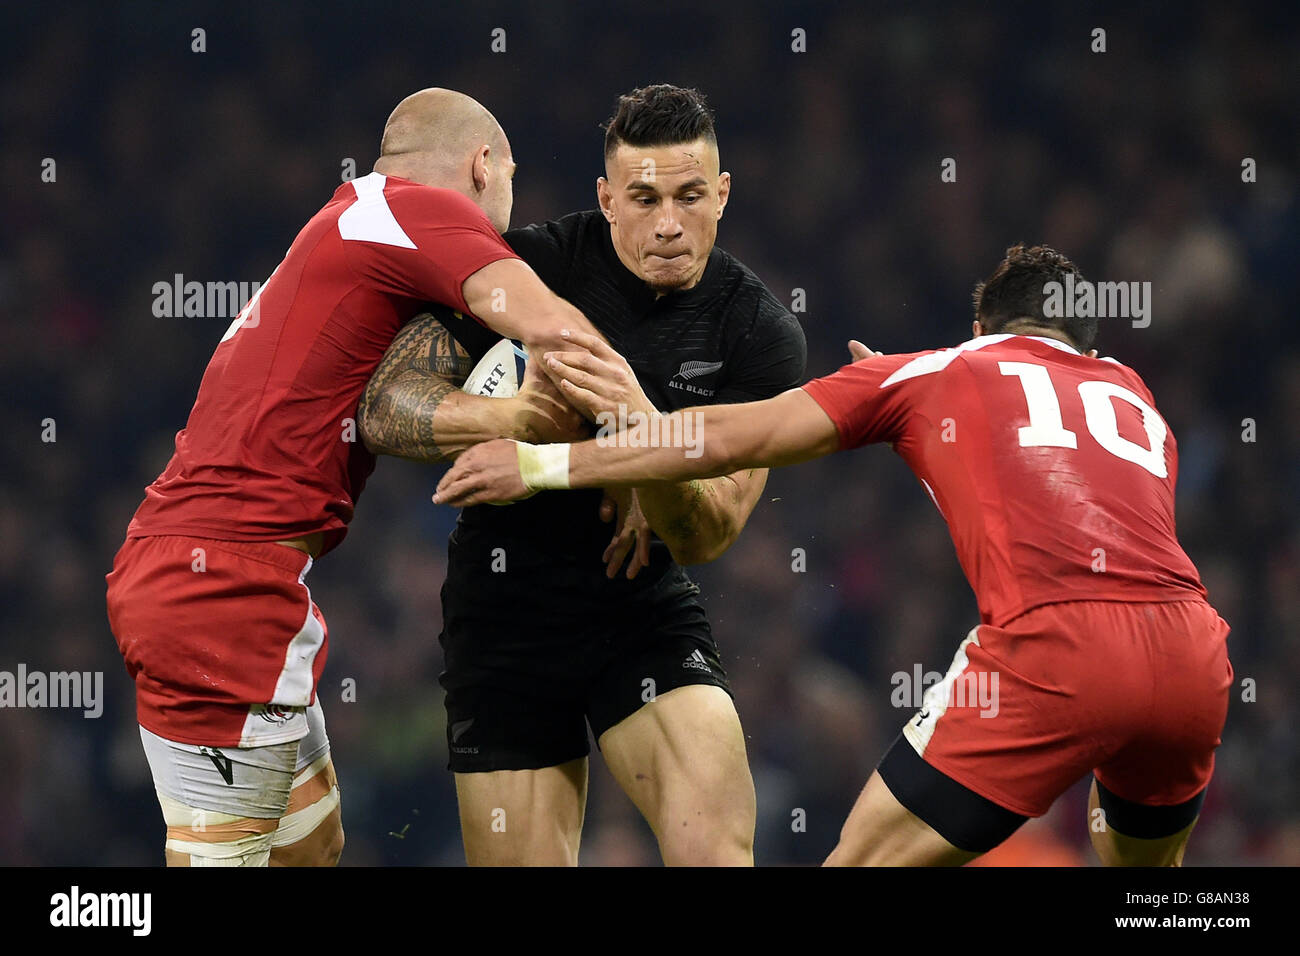 New Zealand's Sonny Bill Williams (centre) is tackled by Georgia's Lasha Lomidze (left) and Lasha Malaguradze during the Rugby World Cup match at the Millennium Stadium, Cardiff. Stock Photo